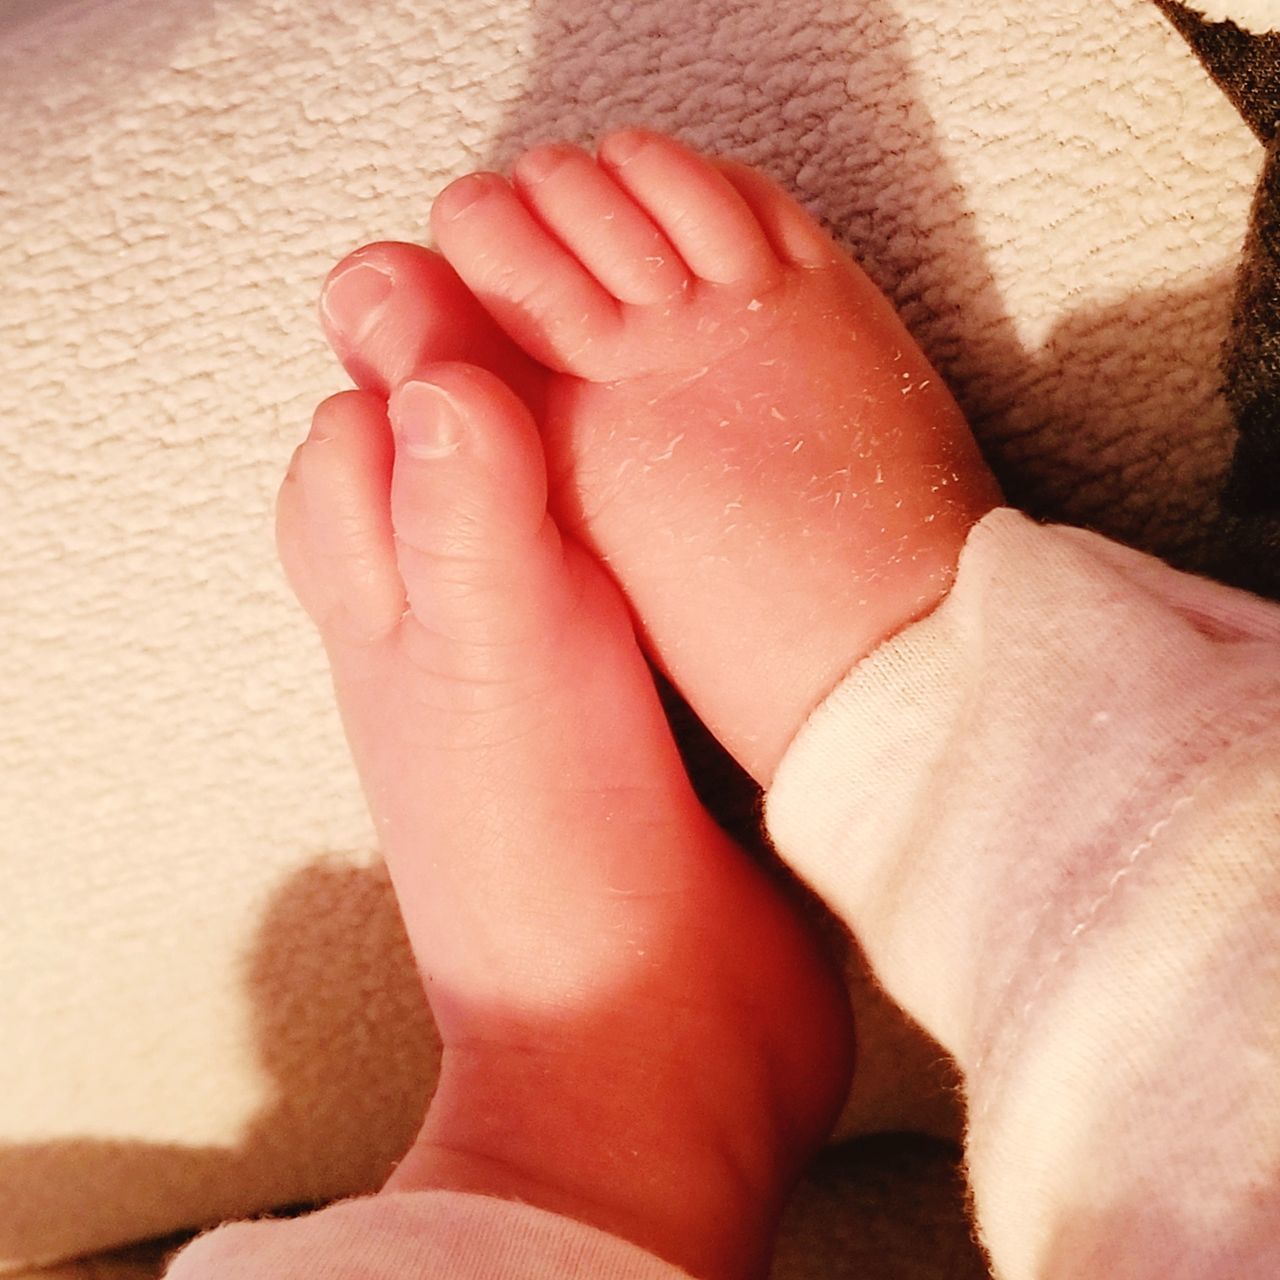 human body part, baby, real people, young, body part, child, barefoot, human leg, babyhood, childhood, indoors, close-up, human hand, people, family, human foot, two people, hand, positive emotion, finger, innocence, care